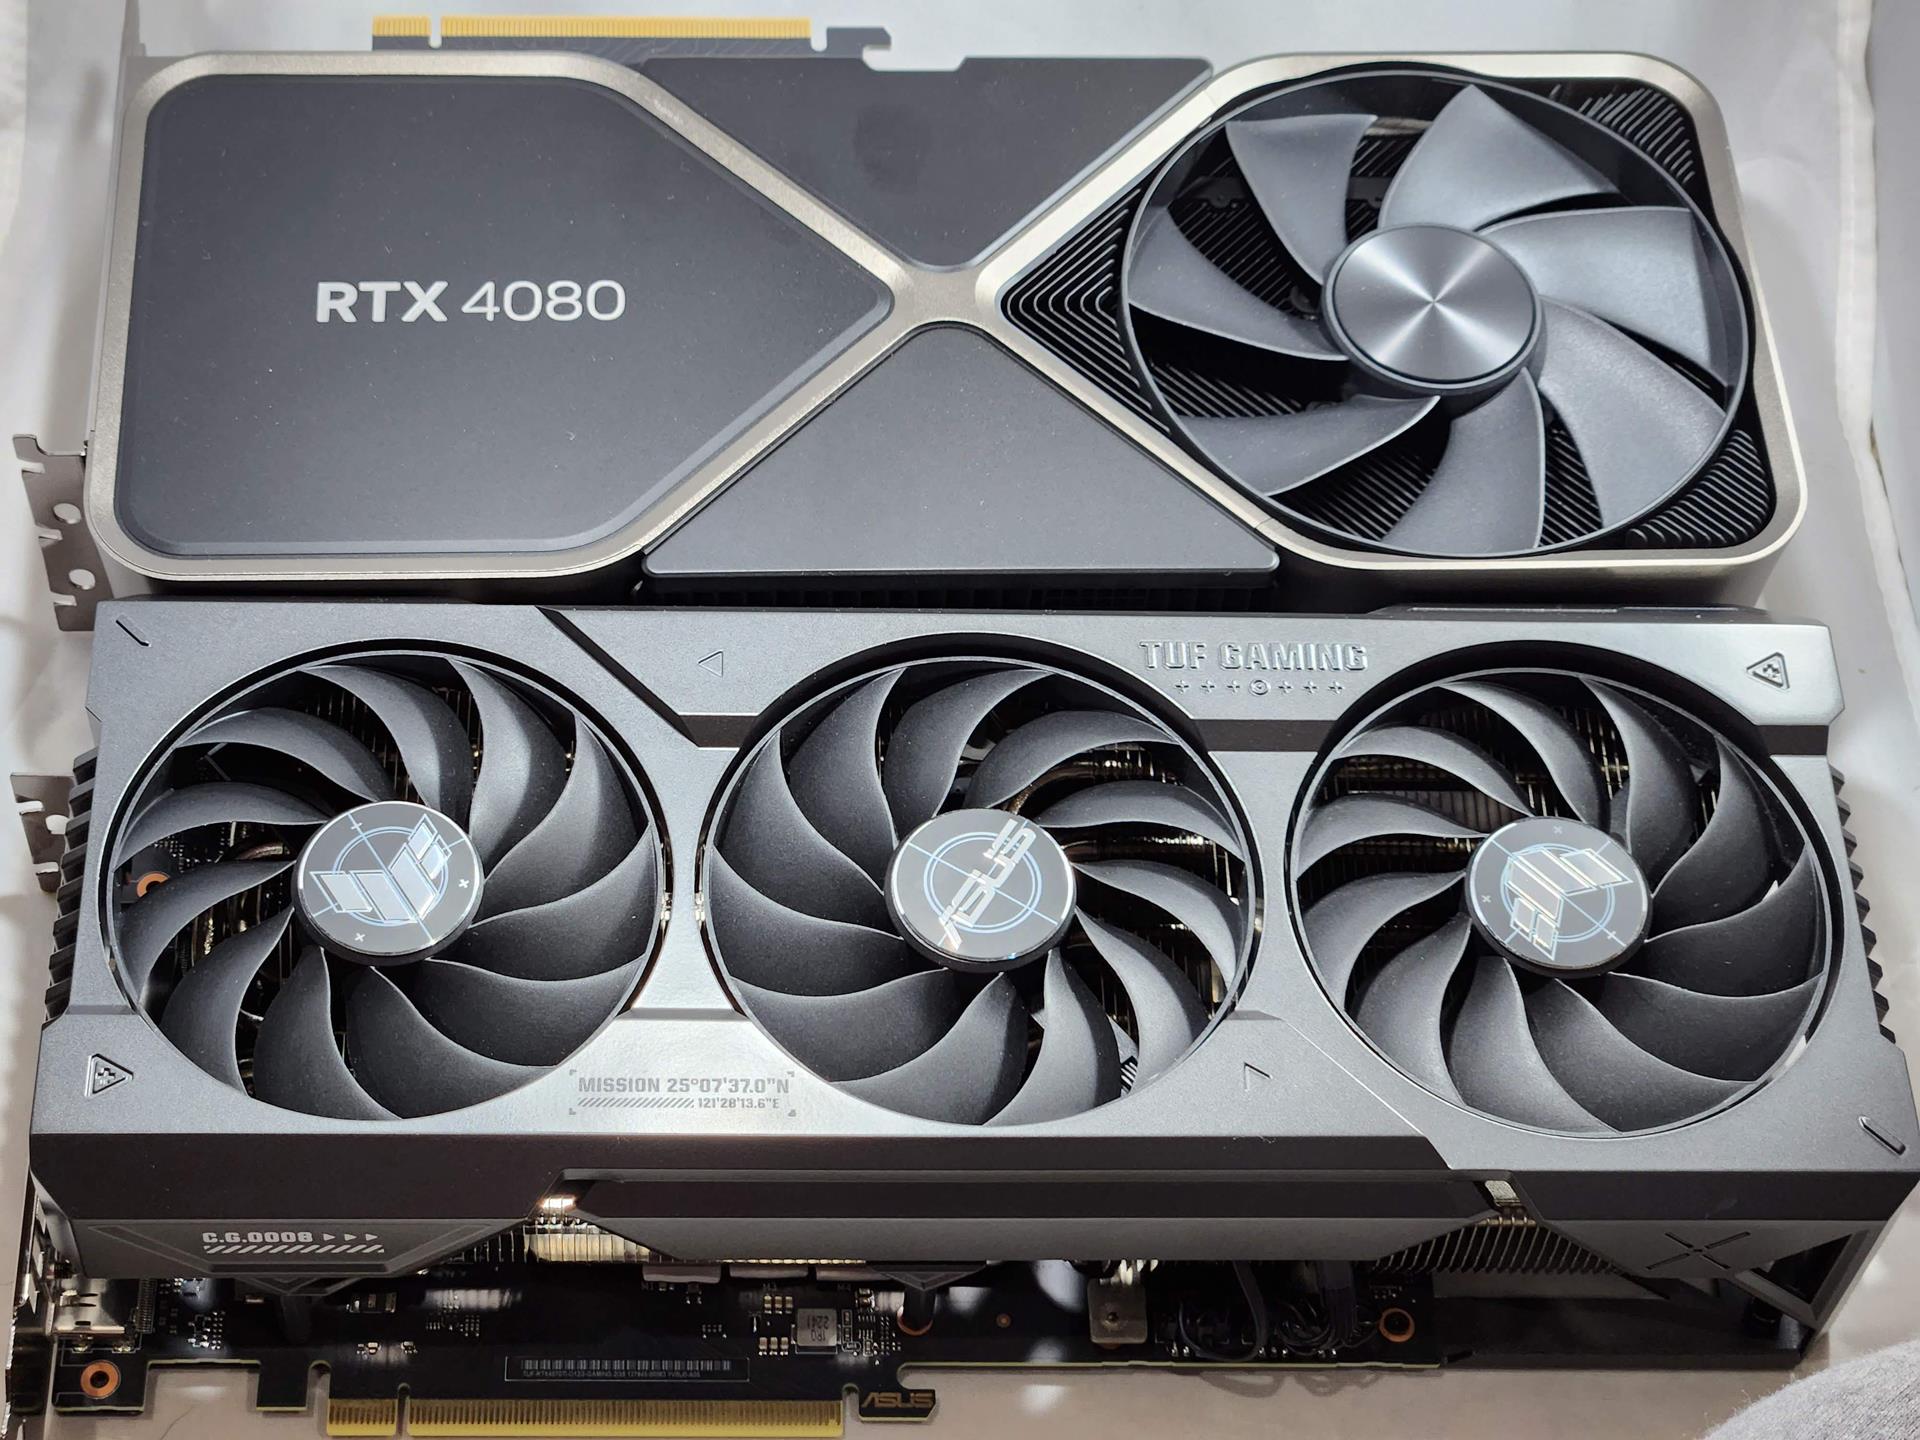 I can't stop thinking about this ridiculously small Asus RTX 4070